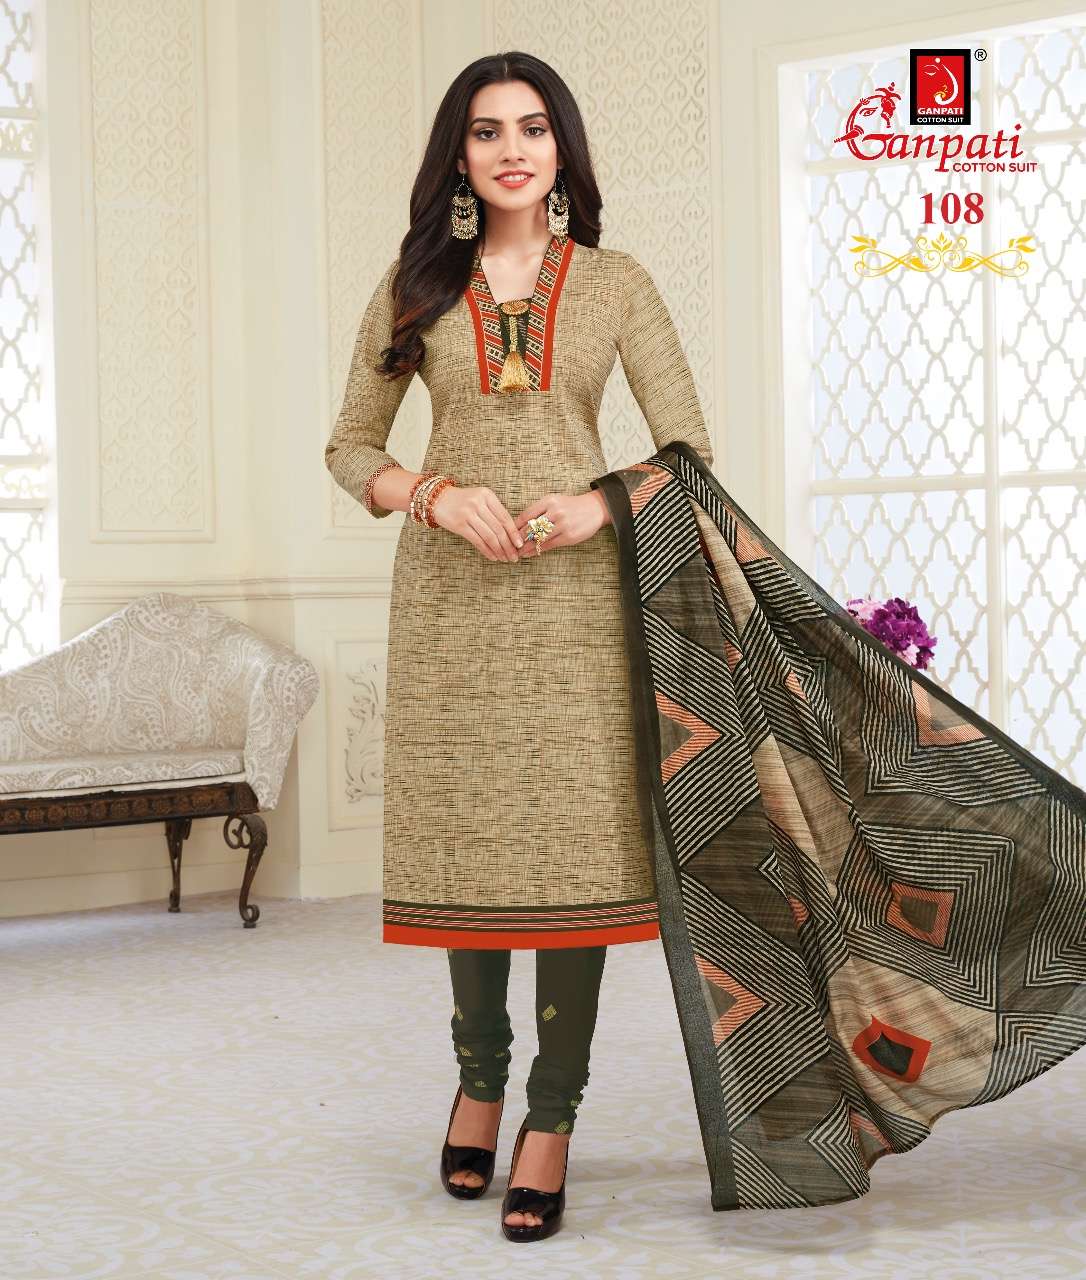 Jeeya Vol-6 By Ganpati Cotton Suits 601 To 615 Series Beautiful Suits Colorful Stylish Fancy Casual Wear & Ethnic Wear Cotton Dresses At Wholesale Price